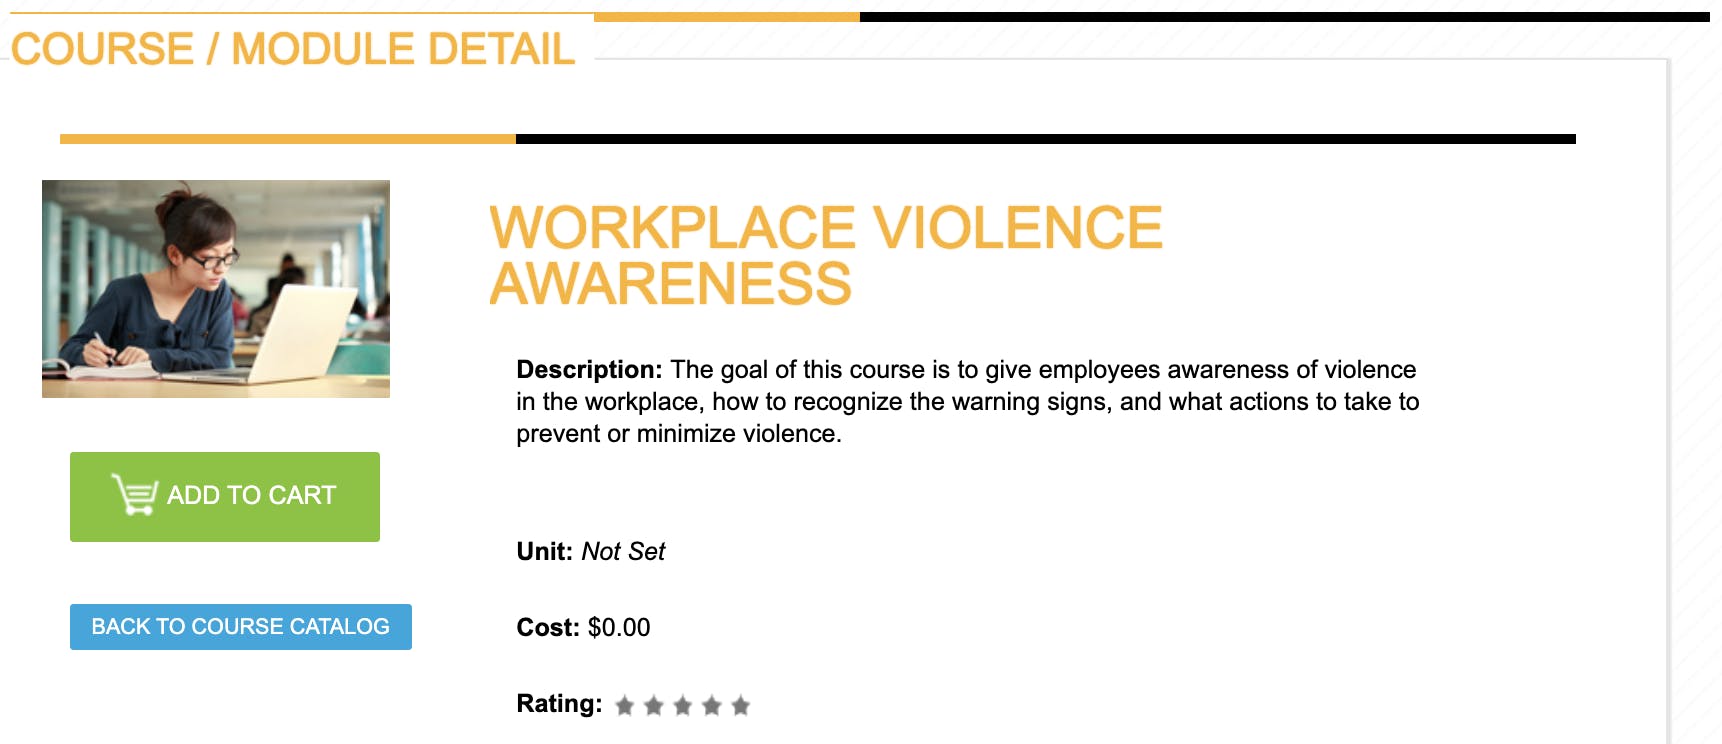 Workplace Violence Prevention - Workplace Violence Awareness from Myicourse